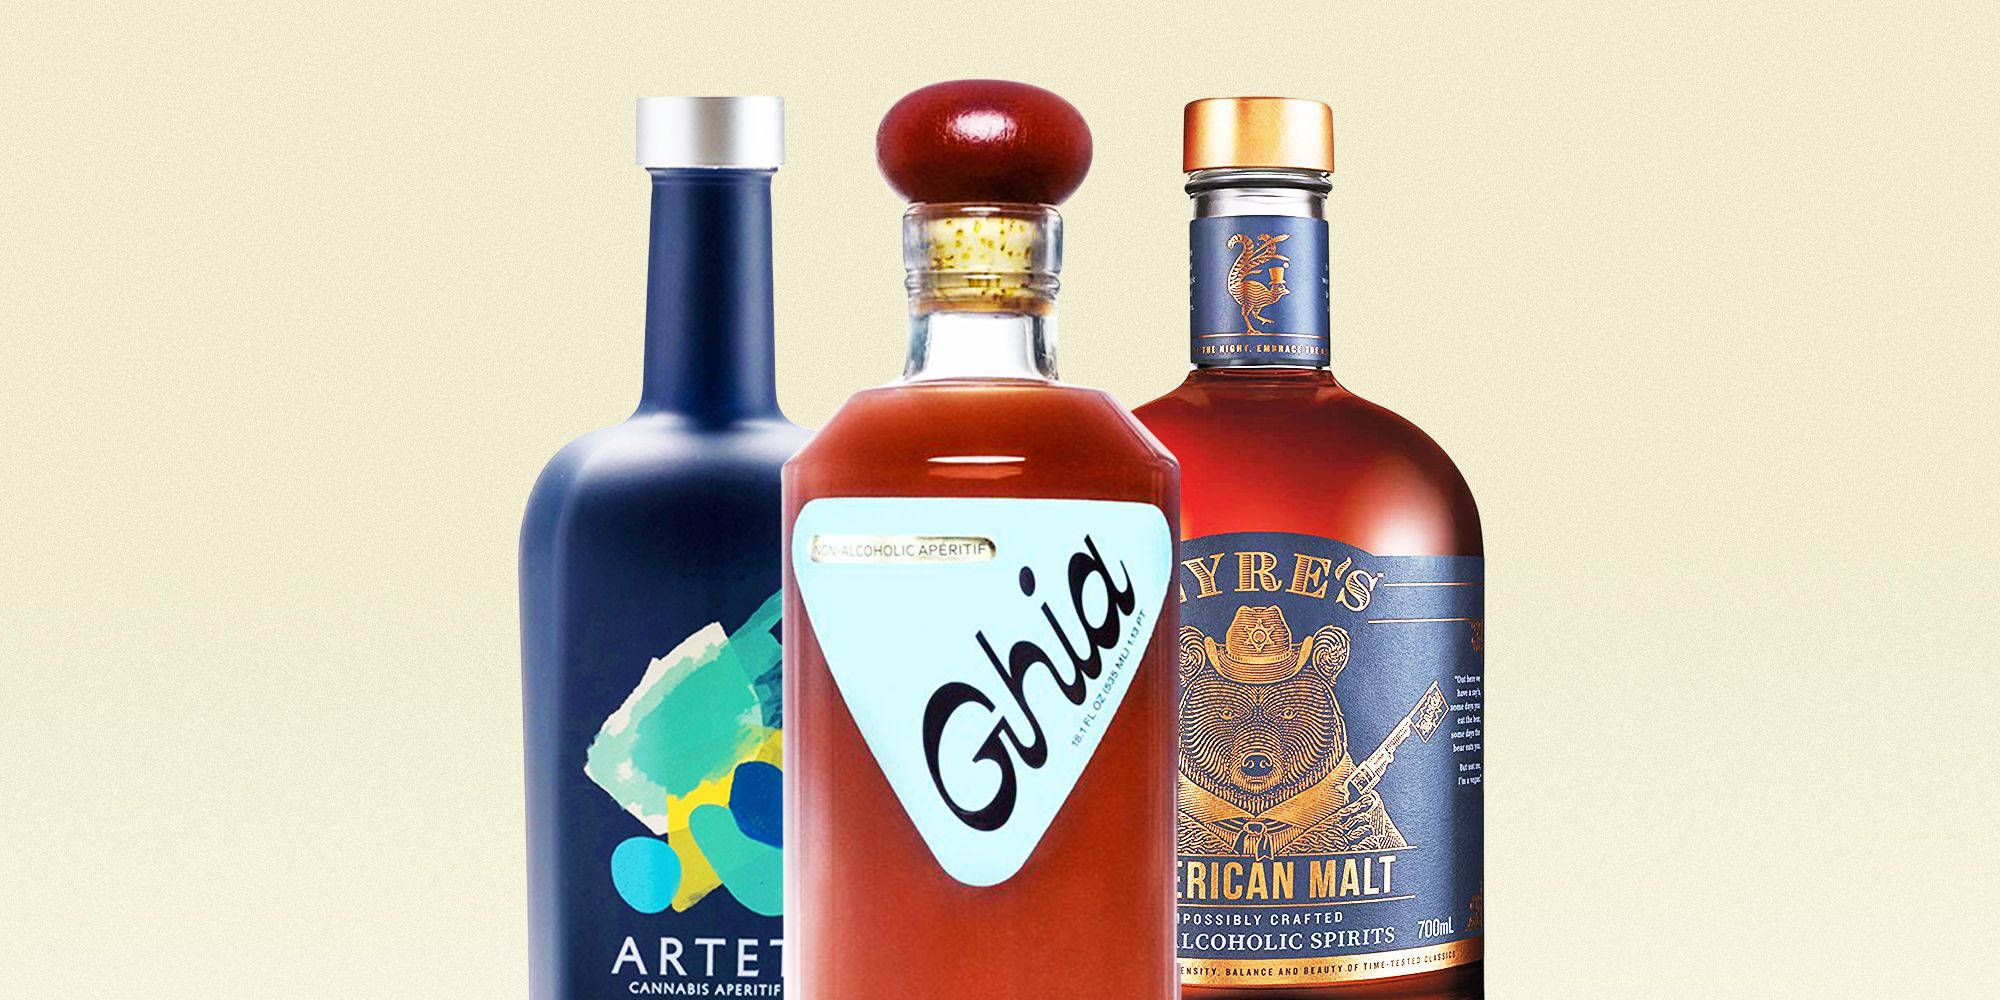 11 best nonalcoholic spirits for Dry January and beyond